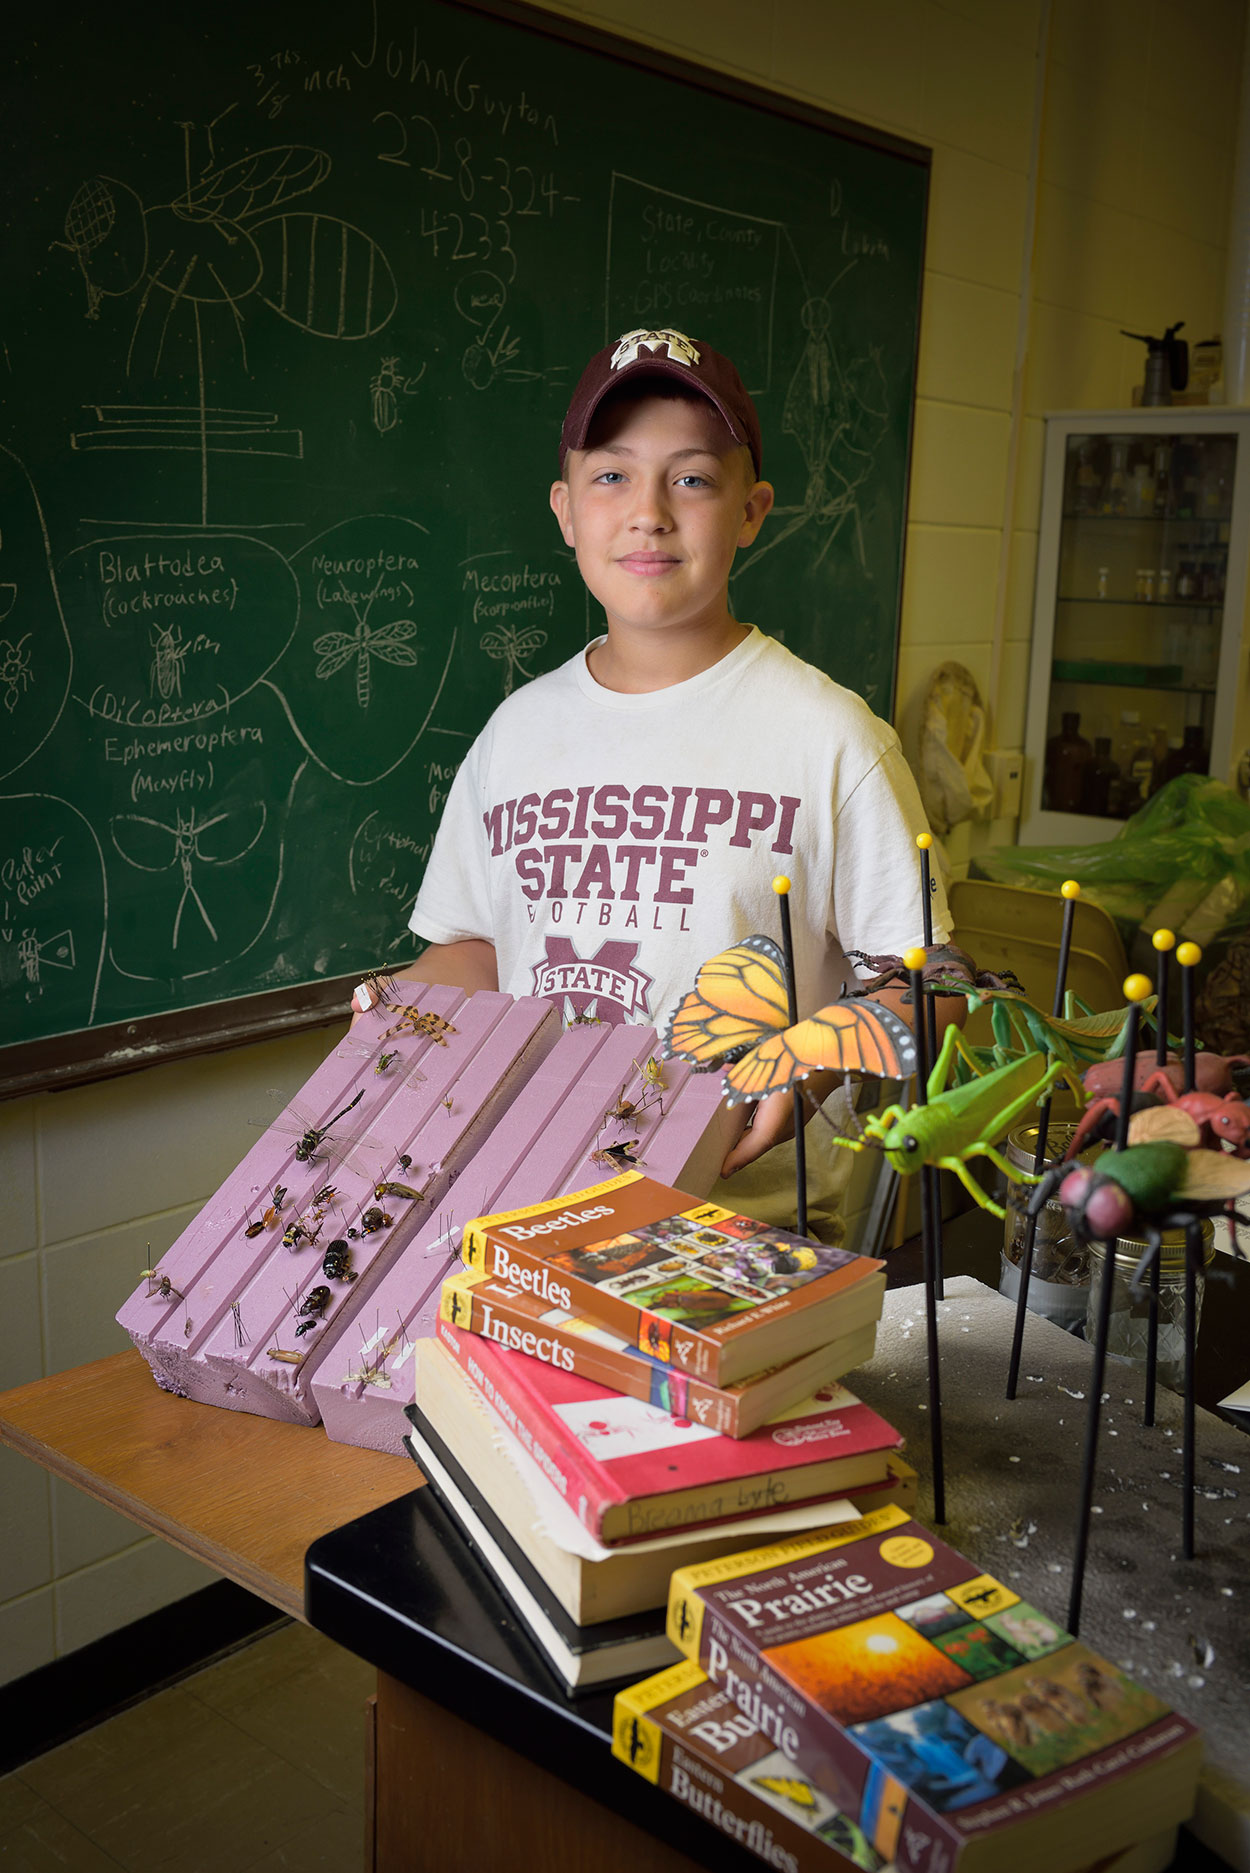 A young boy wearing a Mississippi State hat and t-shirt stands behind a stack of books and insect replicas while he holds his project, a purple piece of wood that showcases many different types of insects.